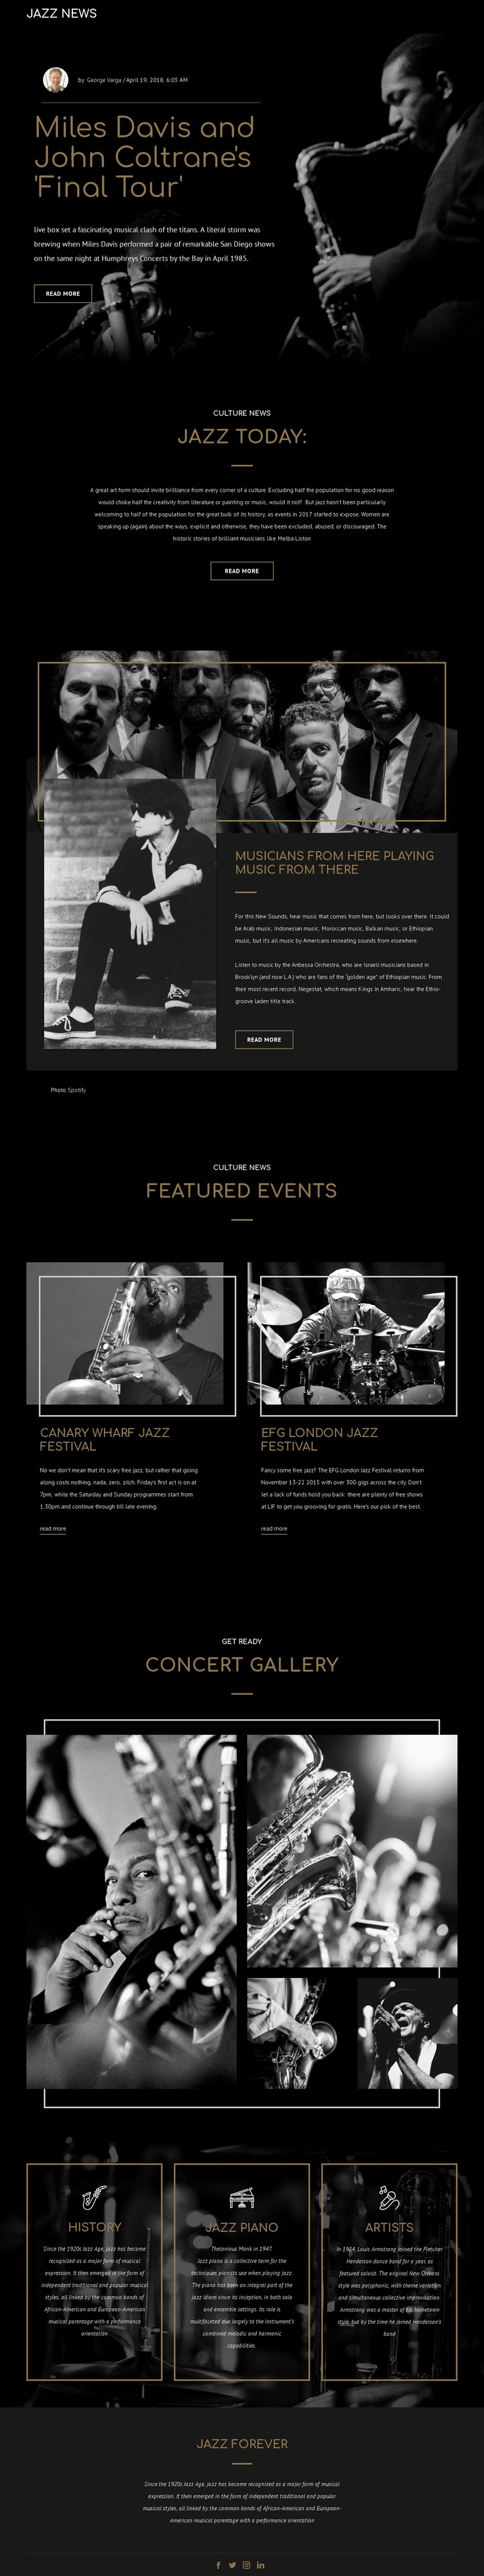 Legengs of jazz music Web Page Design